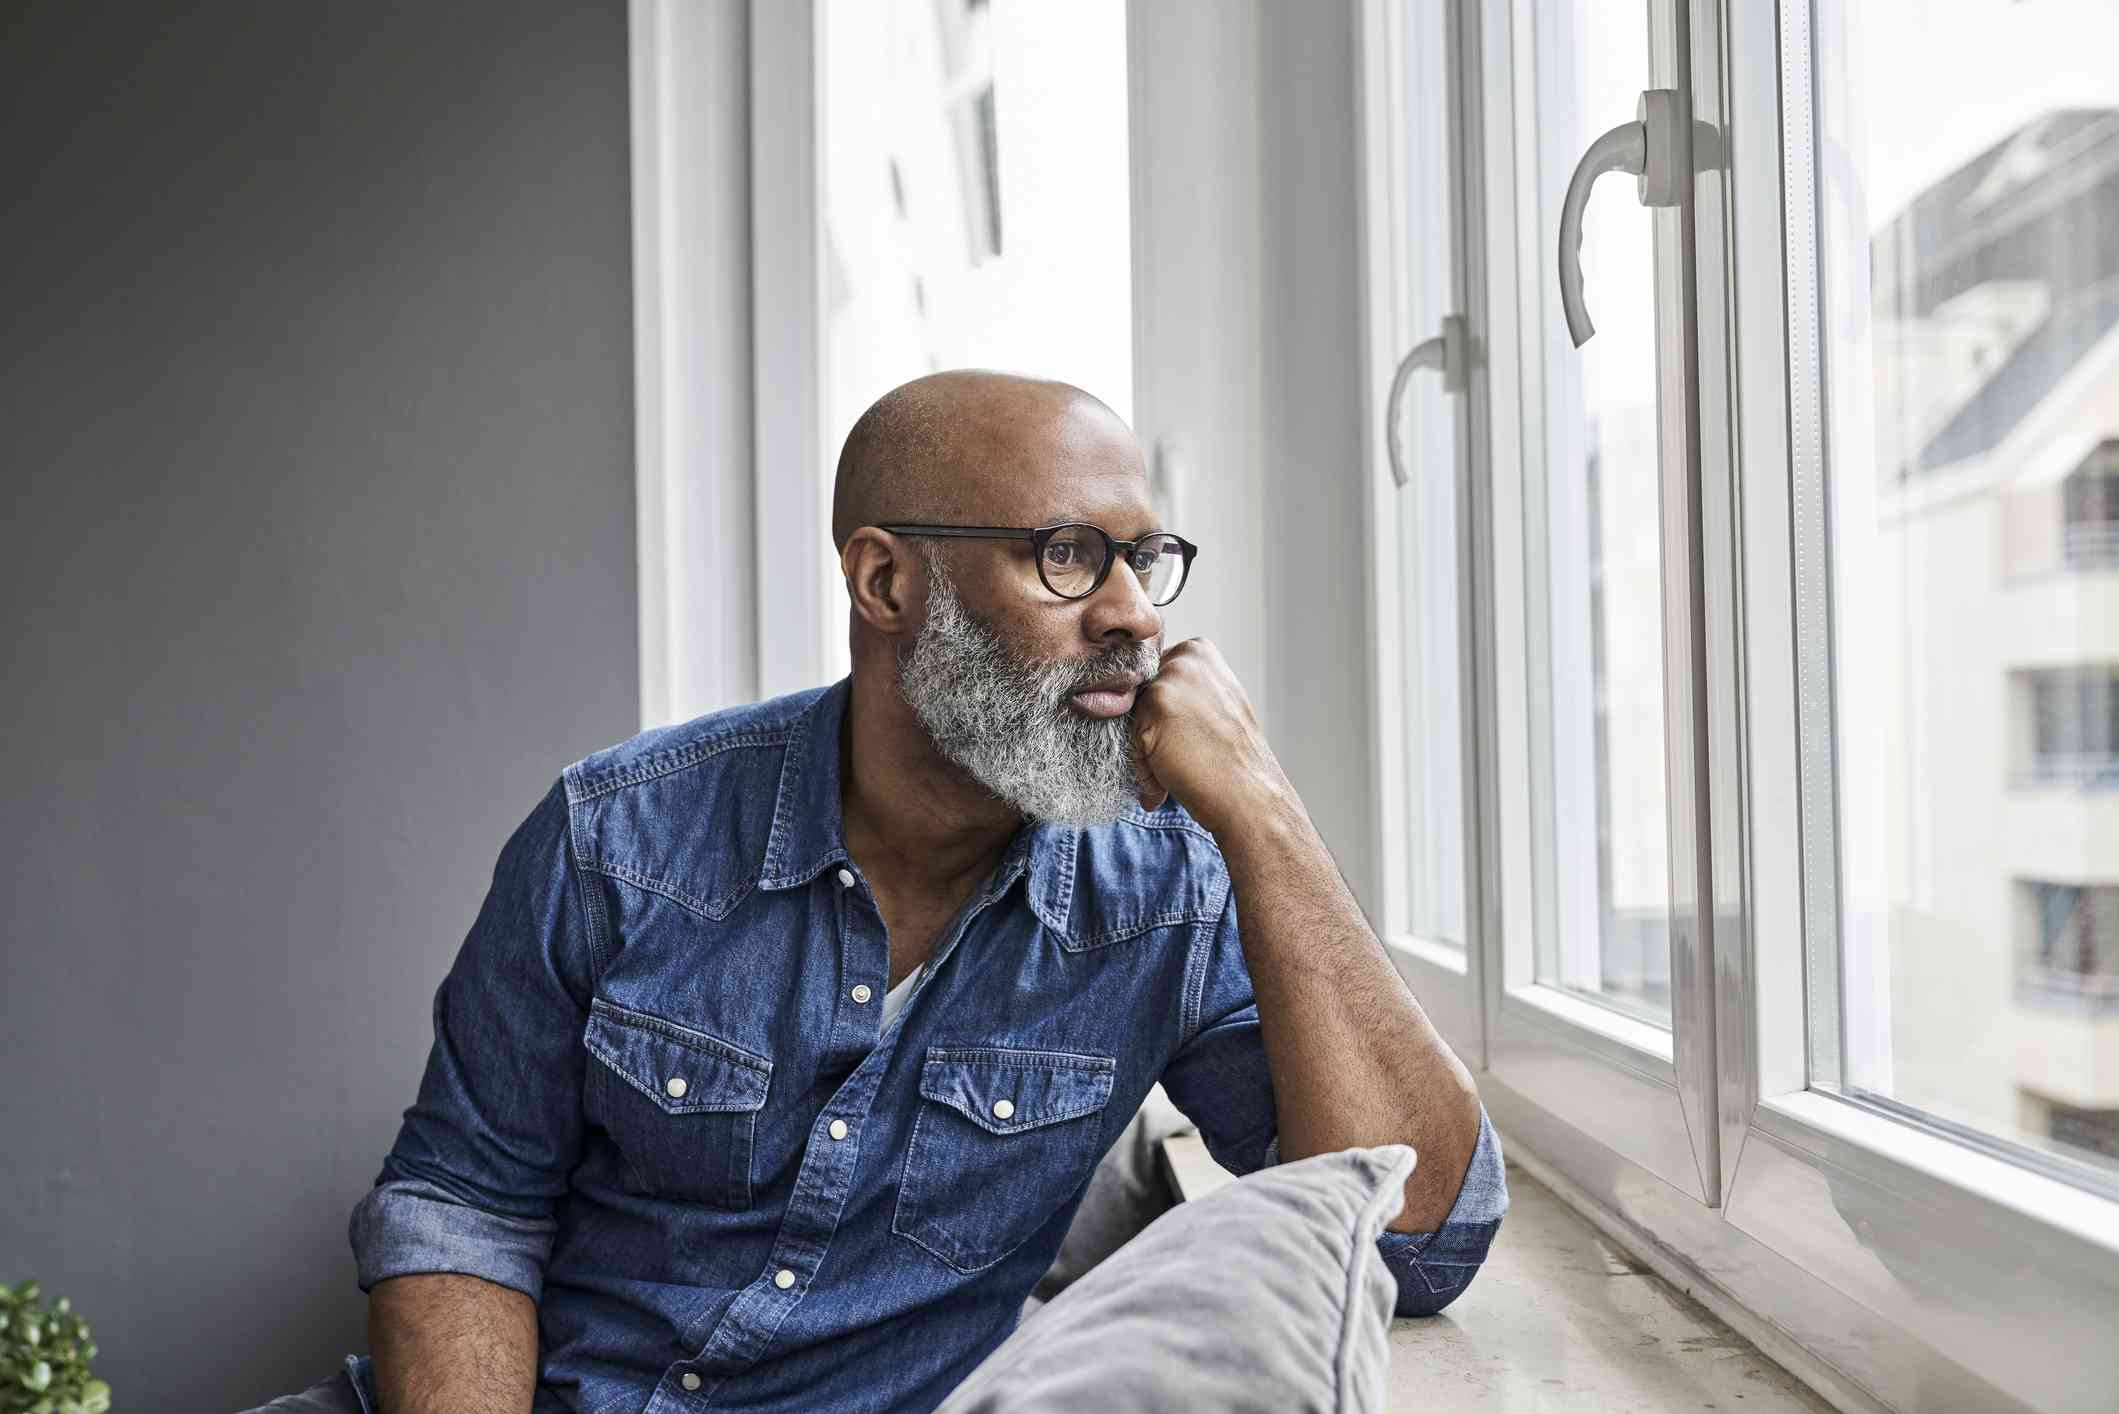 A middle aged man in a jean shirt sits on the couch and gazes sadlly out of the window while deep in thought.